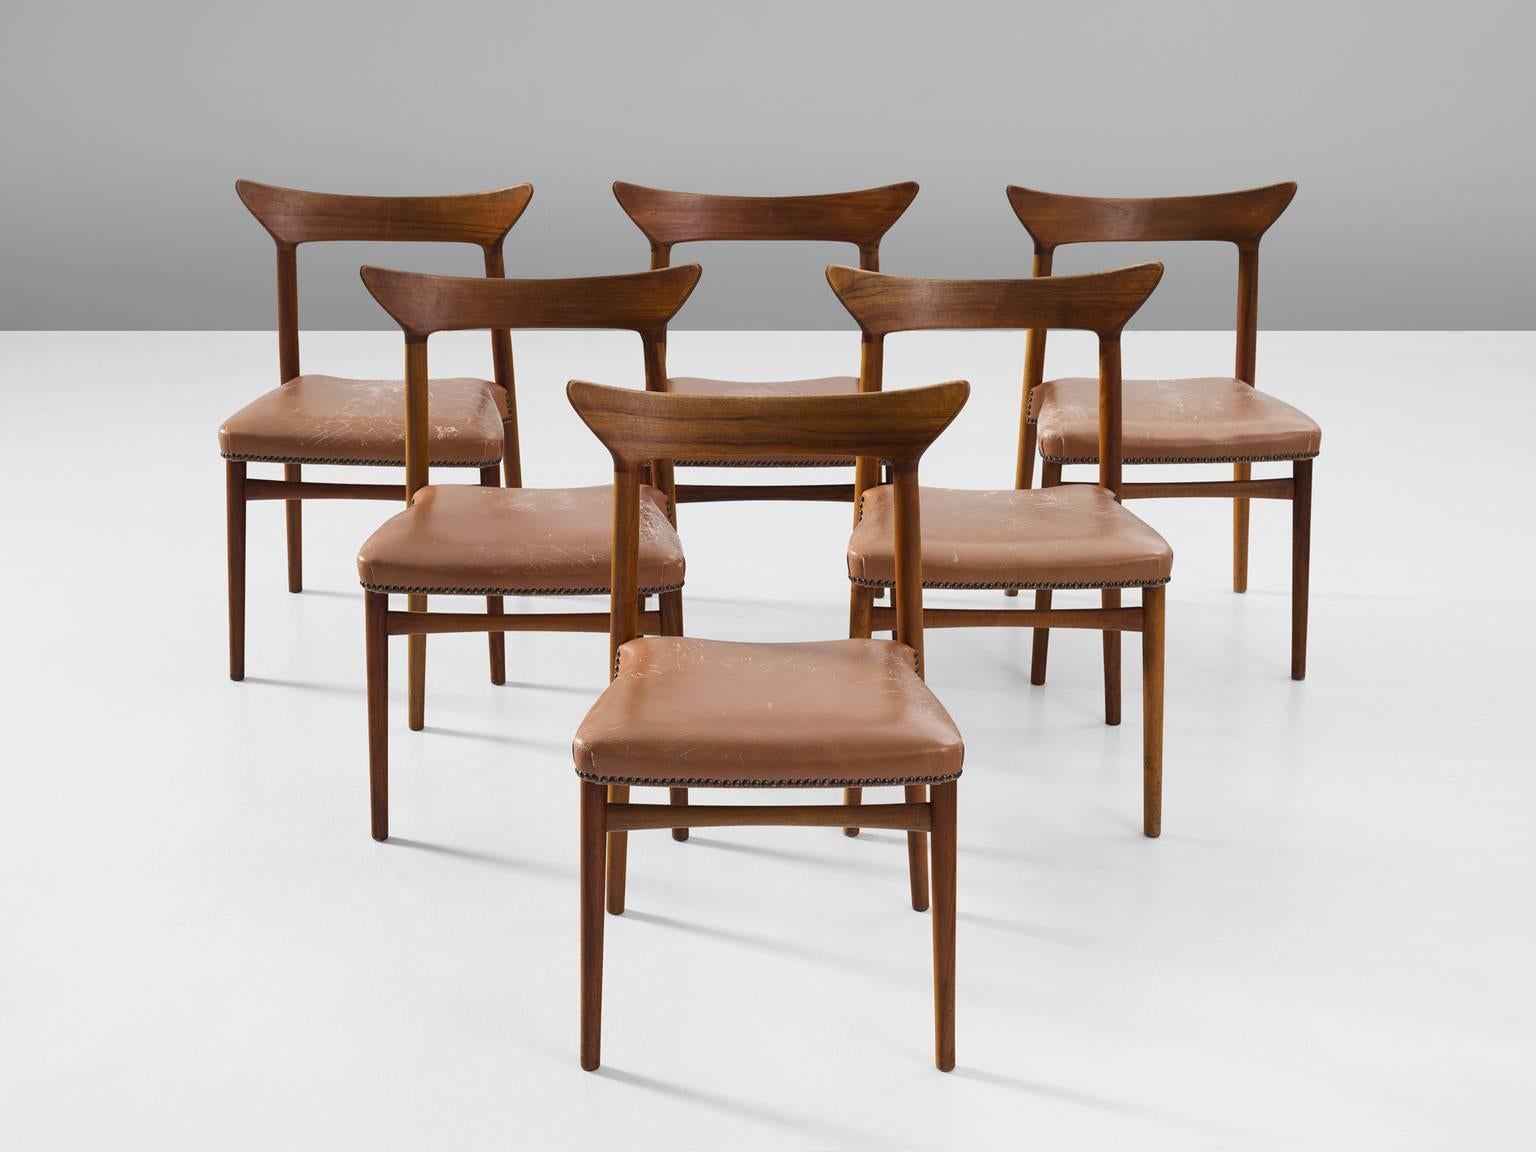 Set of six dining chairs, in walnut and leather, Denmark, 1950s.

This highly rare set of dining chairs shows exquisite Danish craftsmanship. Especially the back is wonderfully sculpted, with slightly upwards directed ends. 
The smooth transition